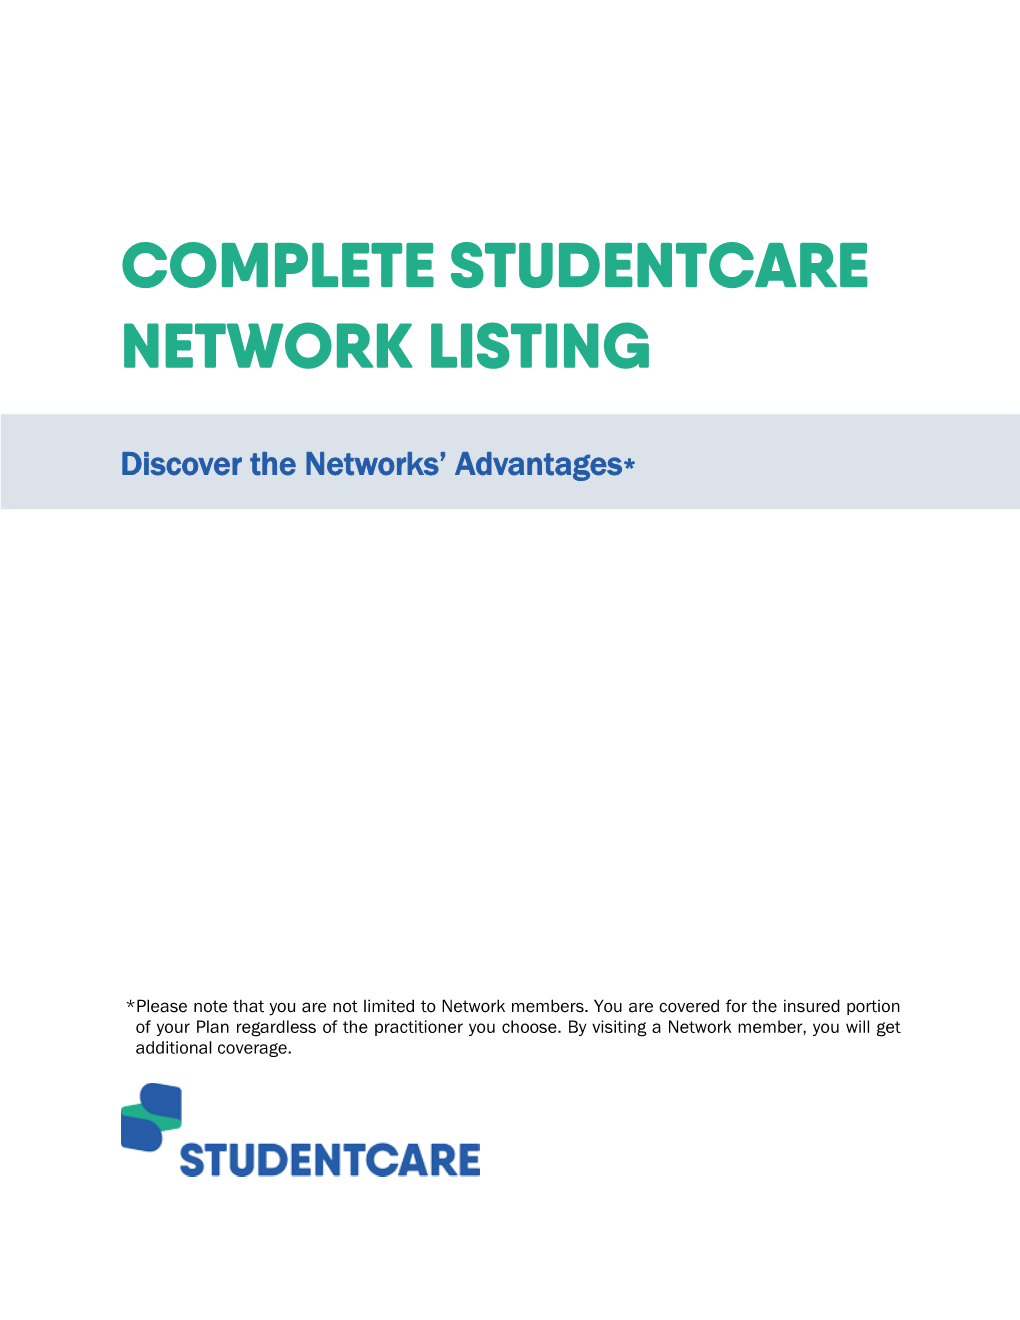 Complete Network Listing